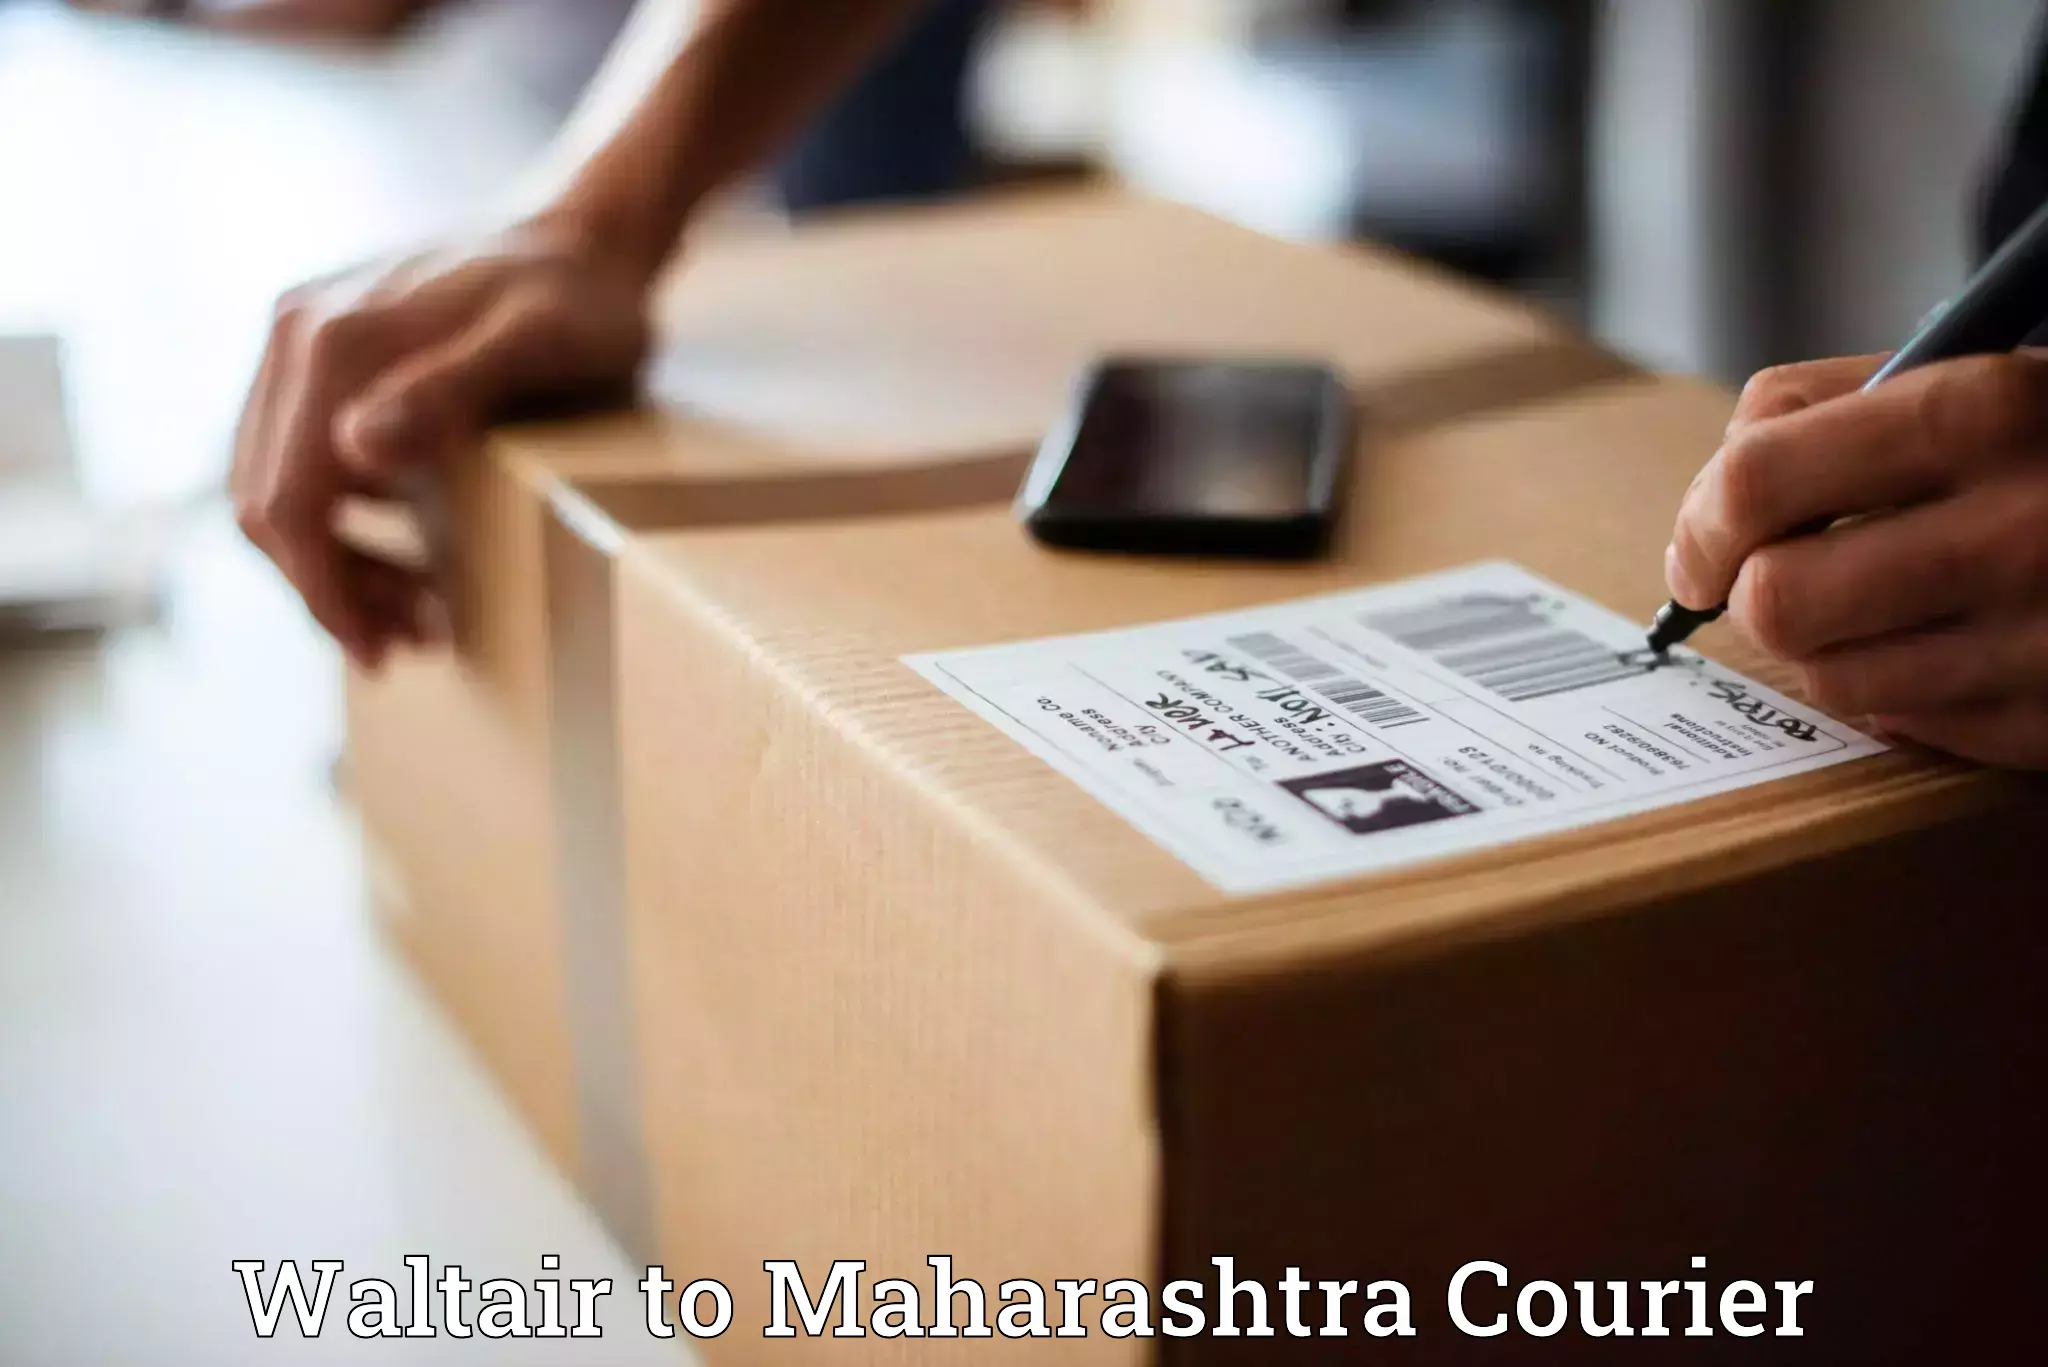 Small business couriers Waltair to Raigarh Maharashtra